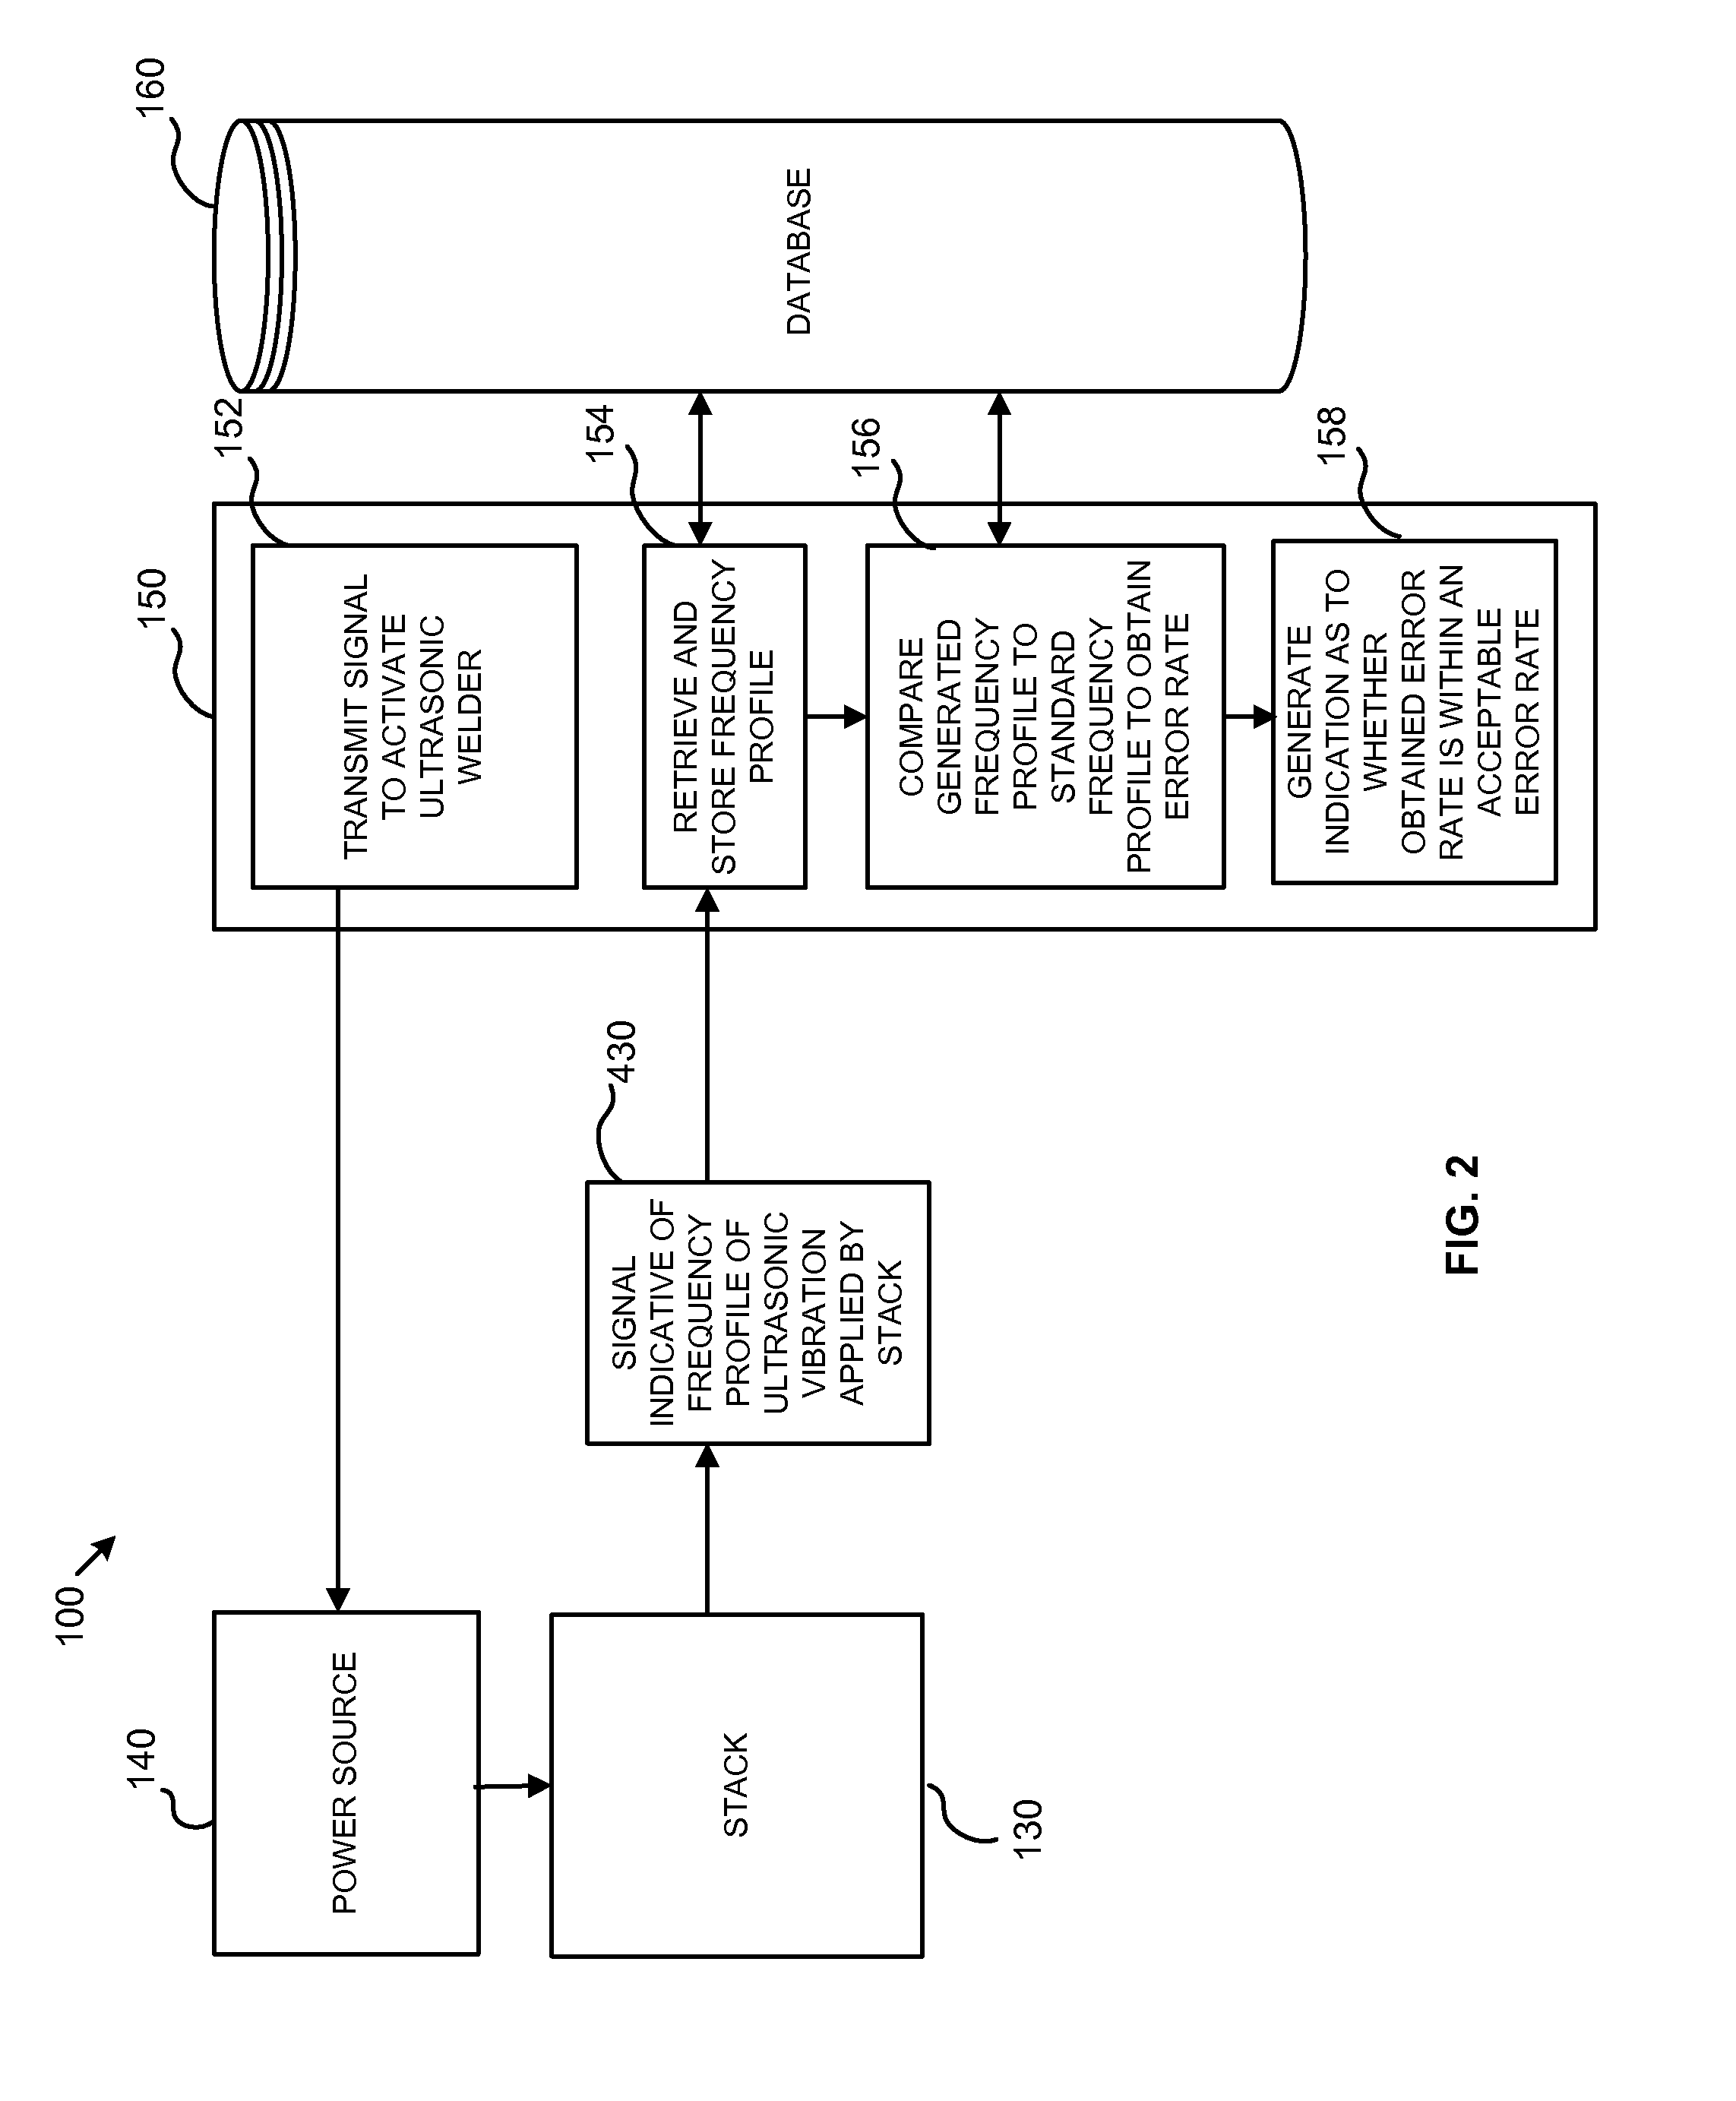 Diagnostic System and Method for Testing Integrity of Stack During Ultrasonic Welding